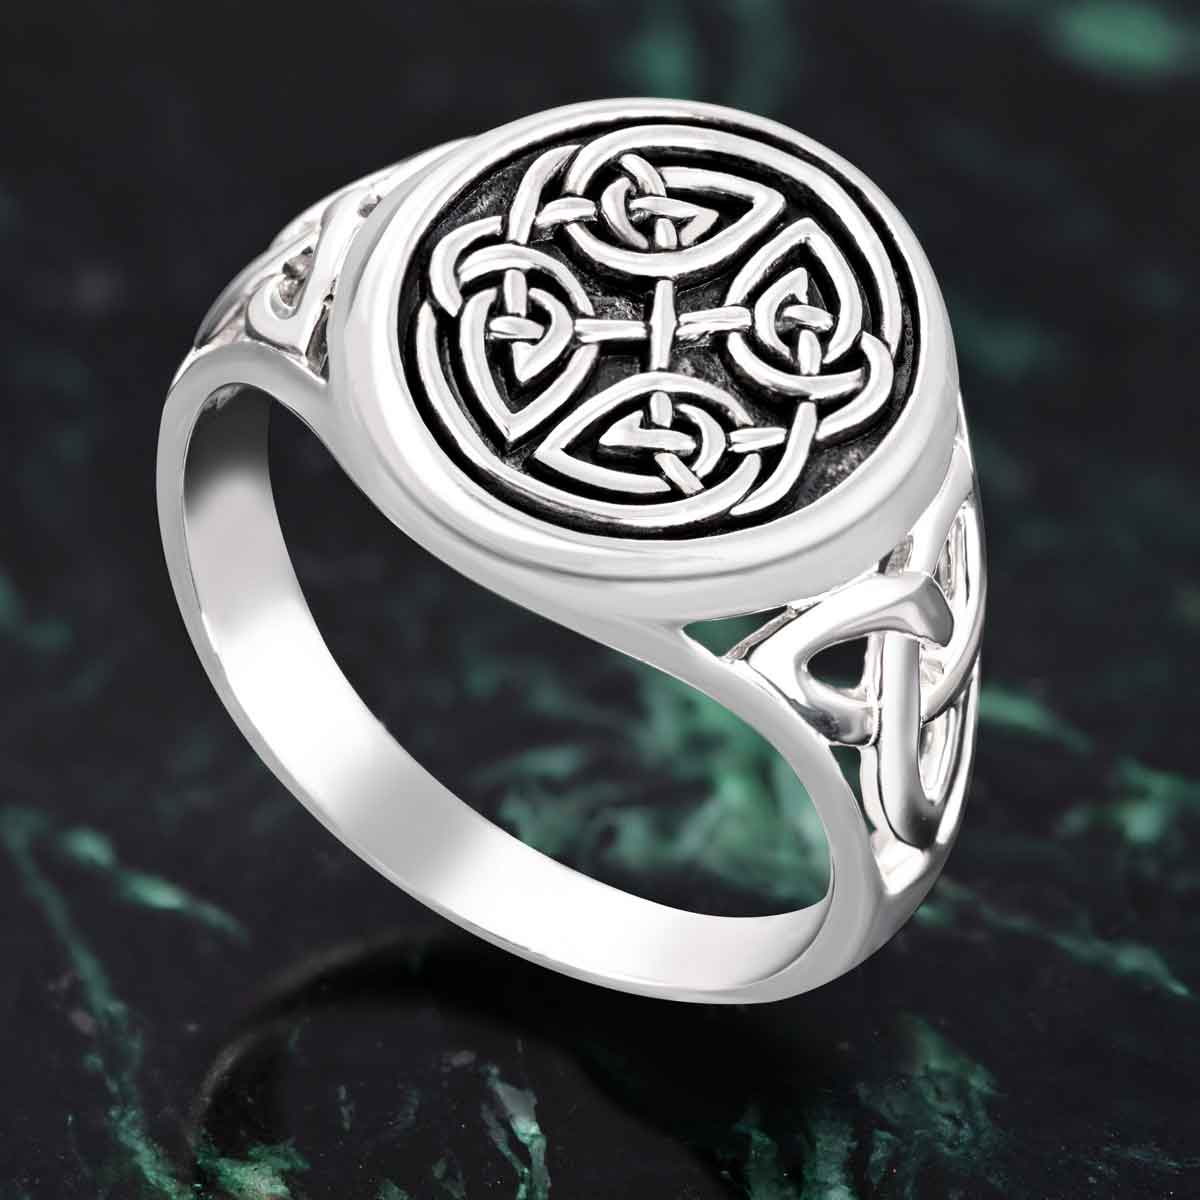 Product image for Irish Ring | Sterling Silver Oxidized Mens Celtic Knot Signet Ring